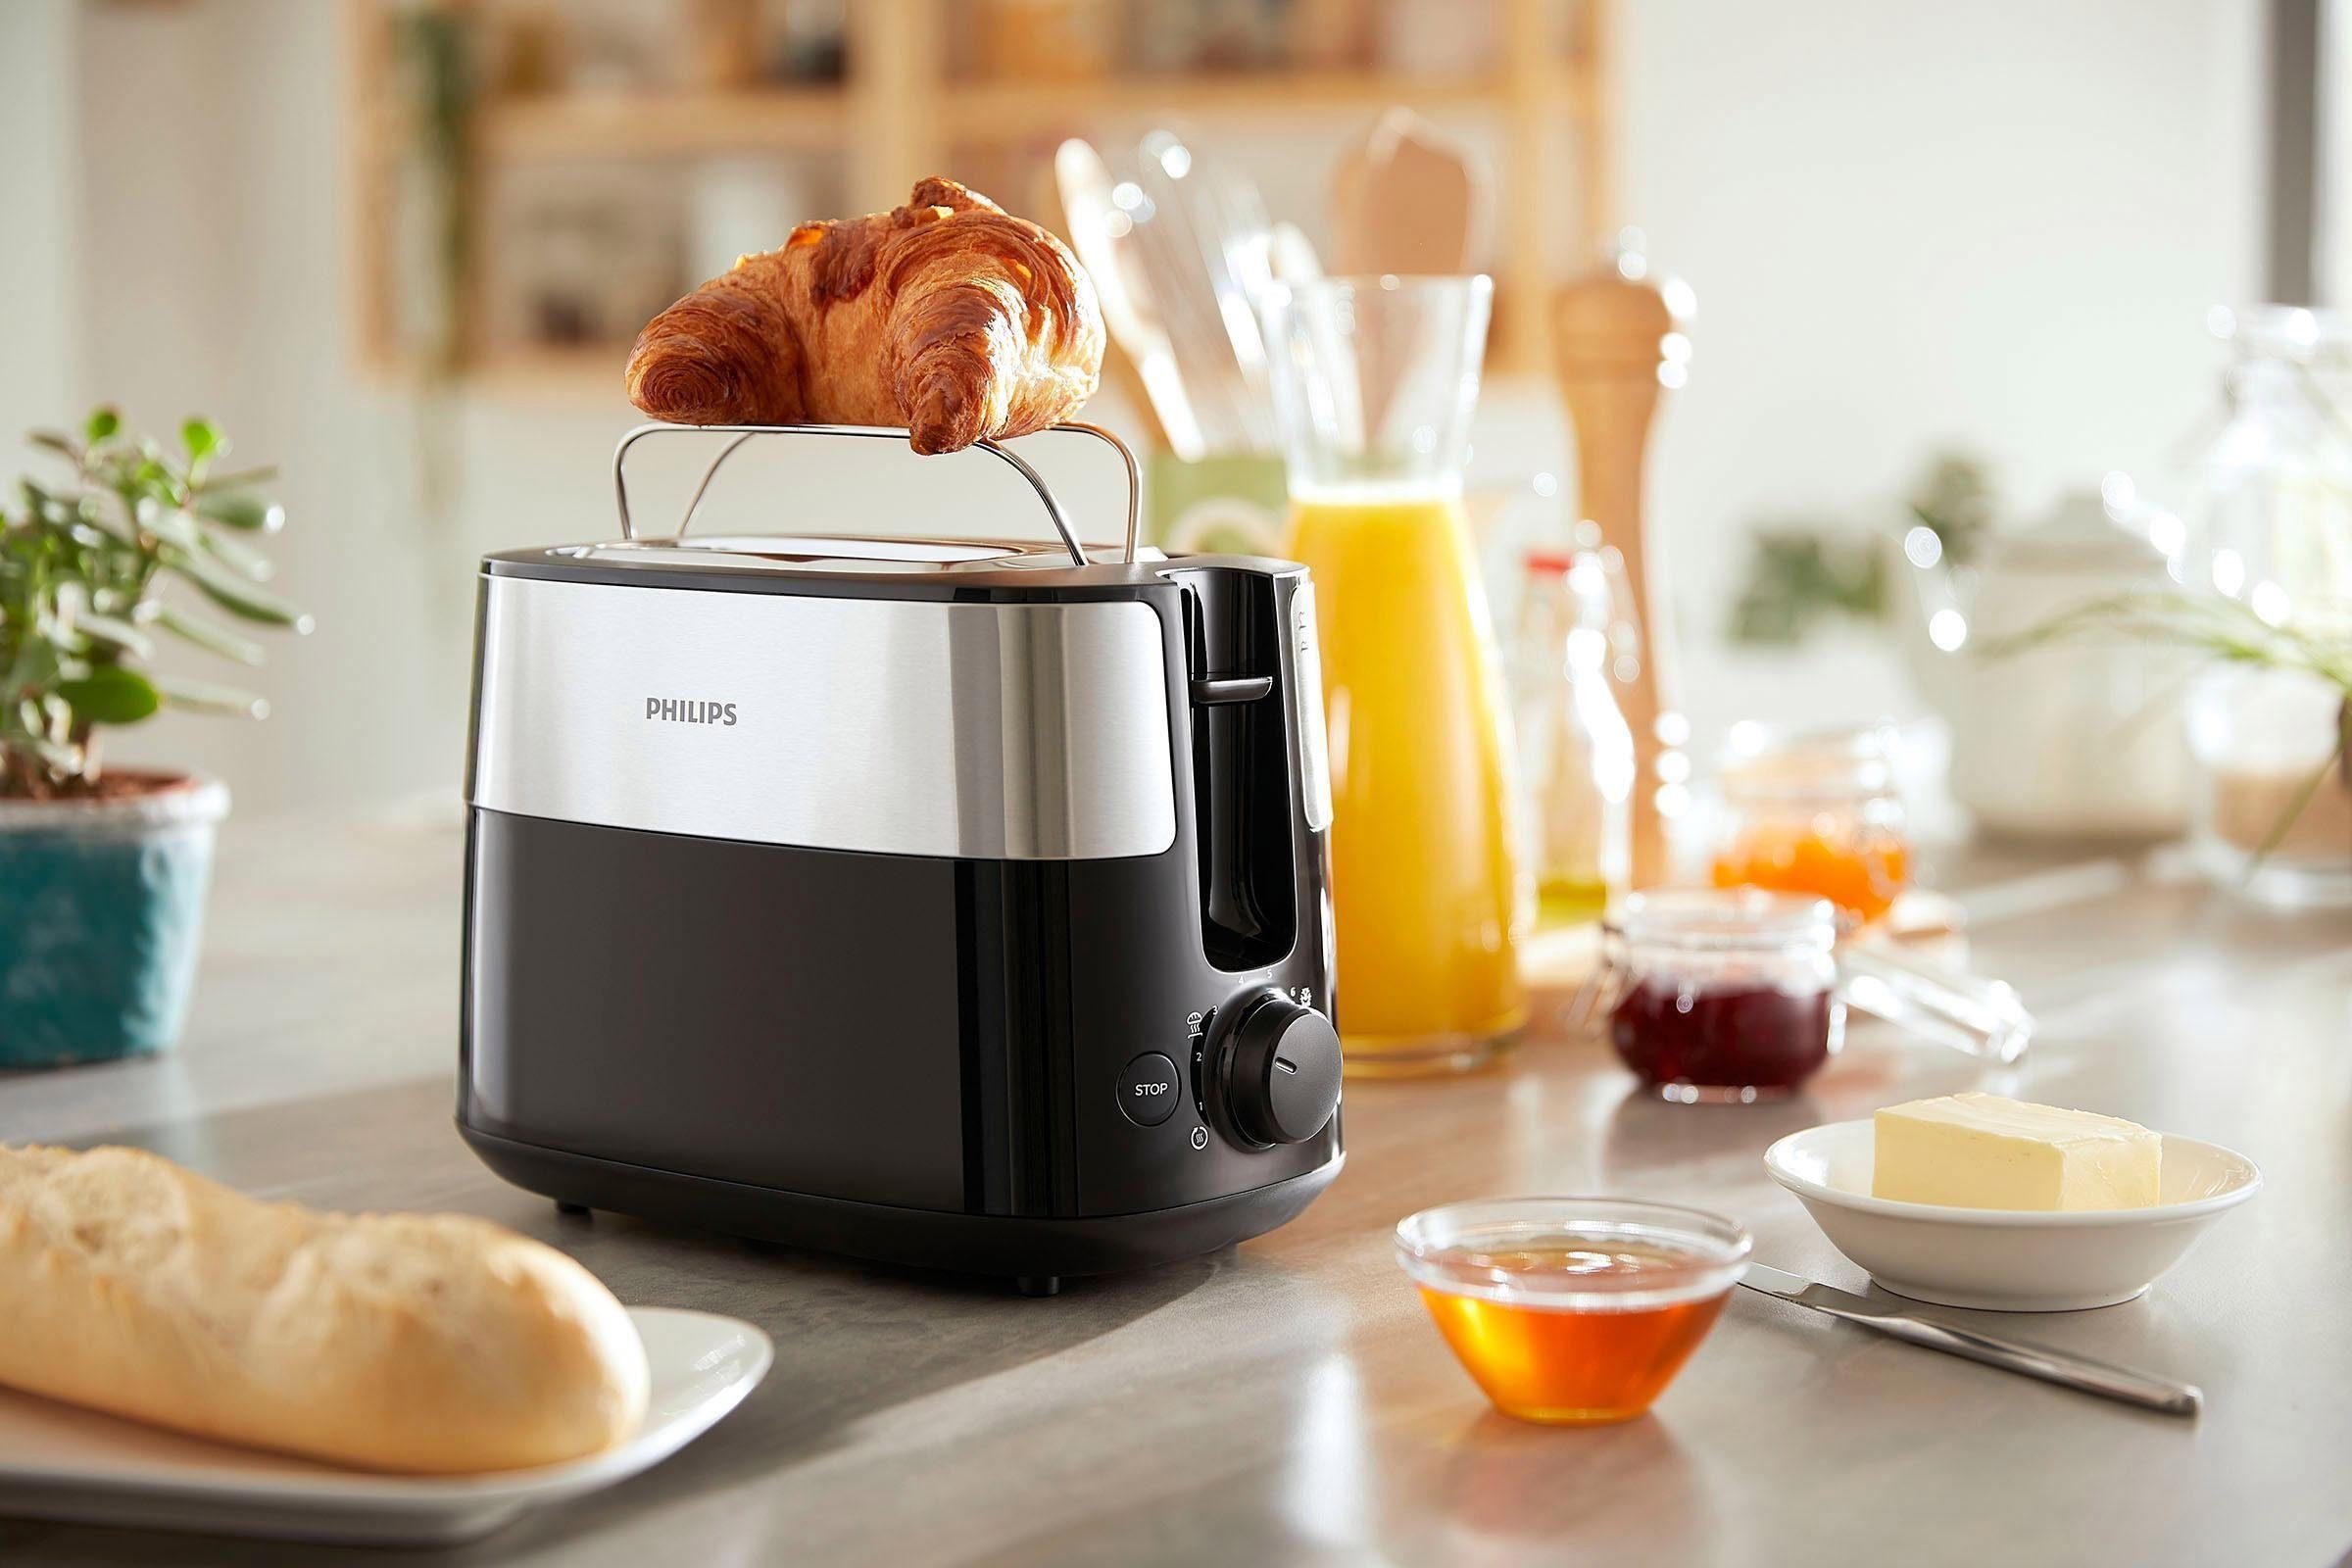 kurze Toaster 2 W Philips Collection 830 Daily Schlitze, HD2516/90,